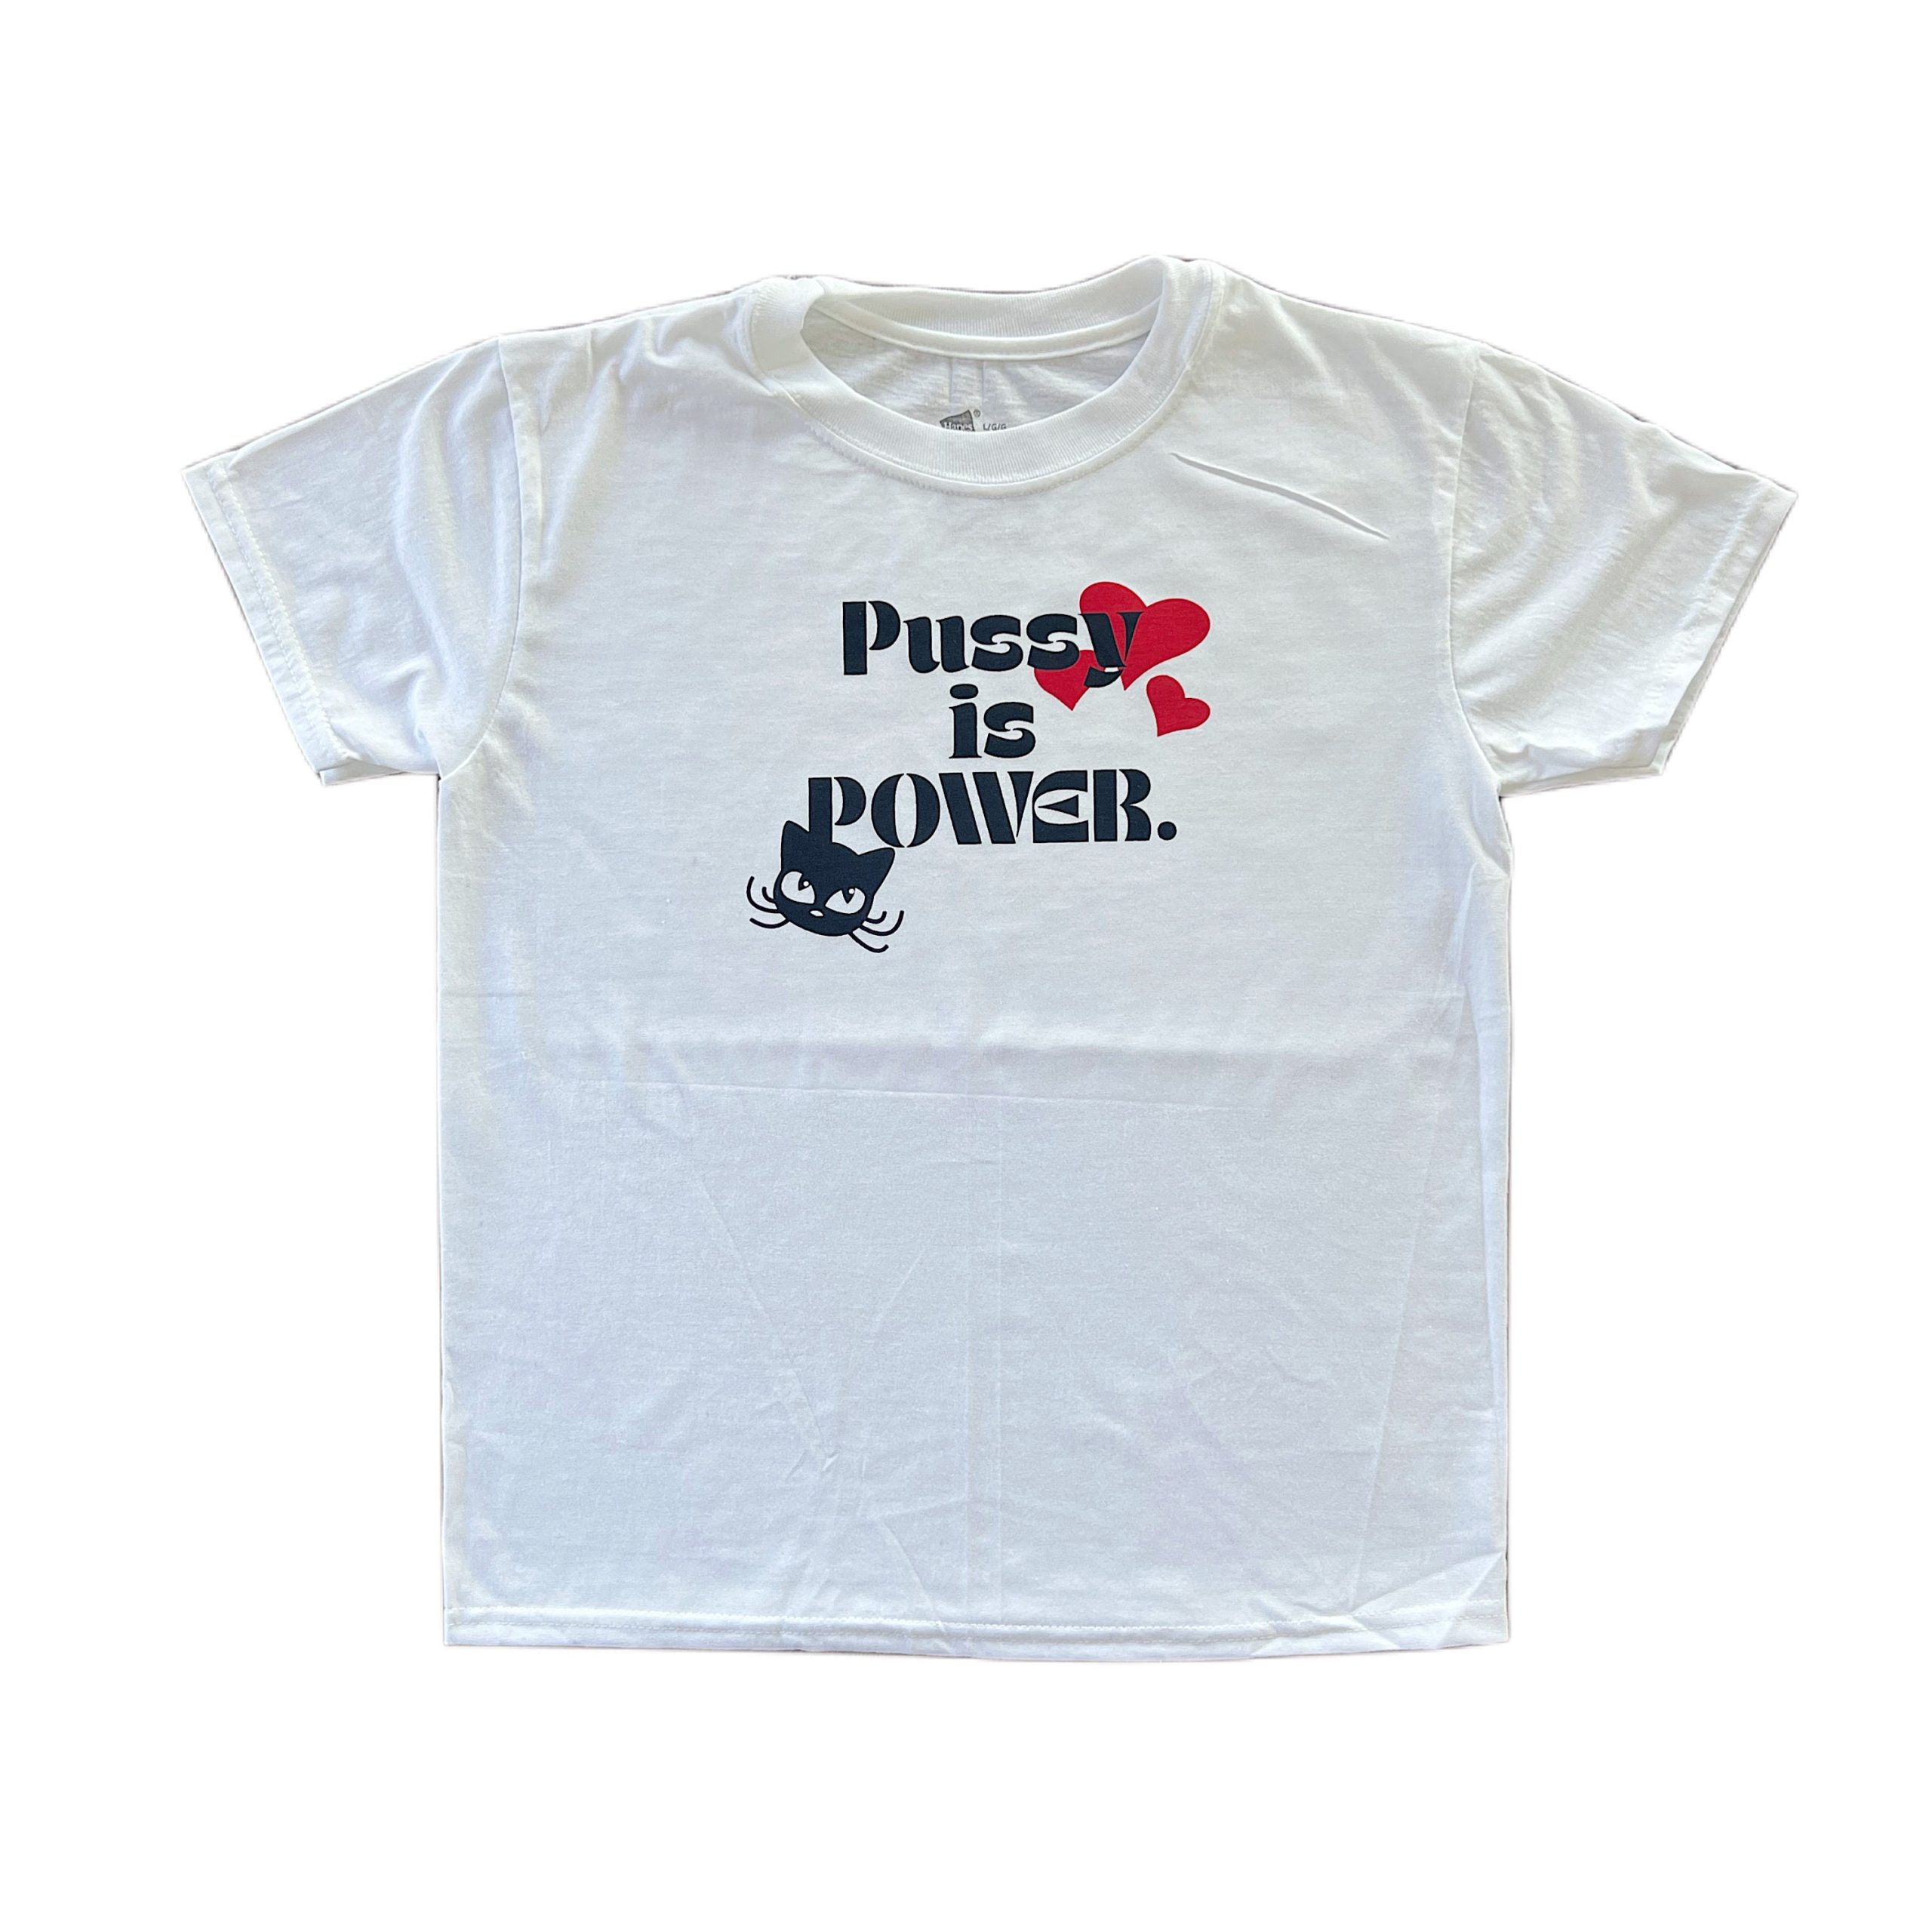 Vintage-inspired "Pussy Power" Baby Tee - Y2K Clothing